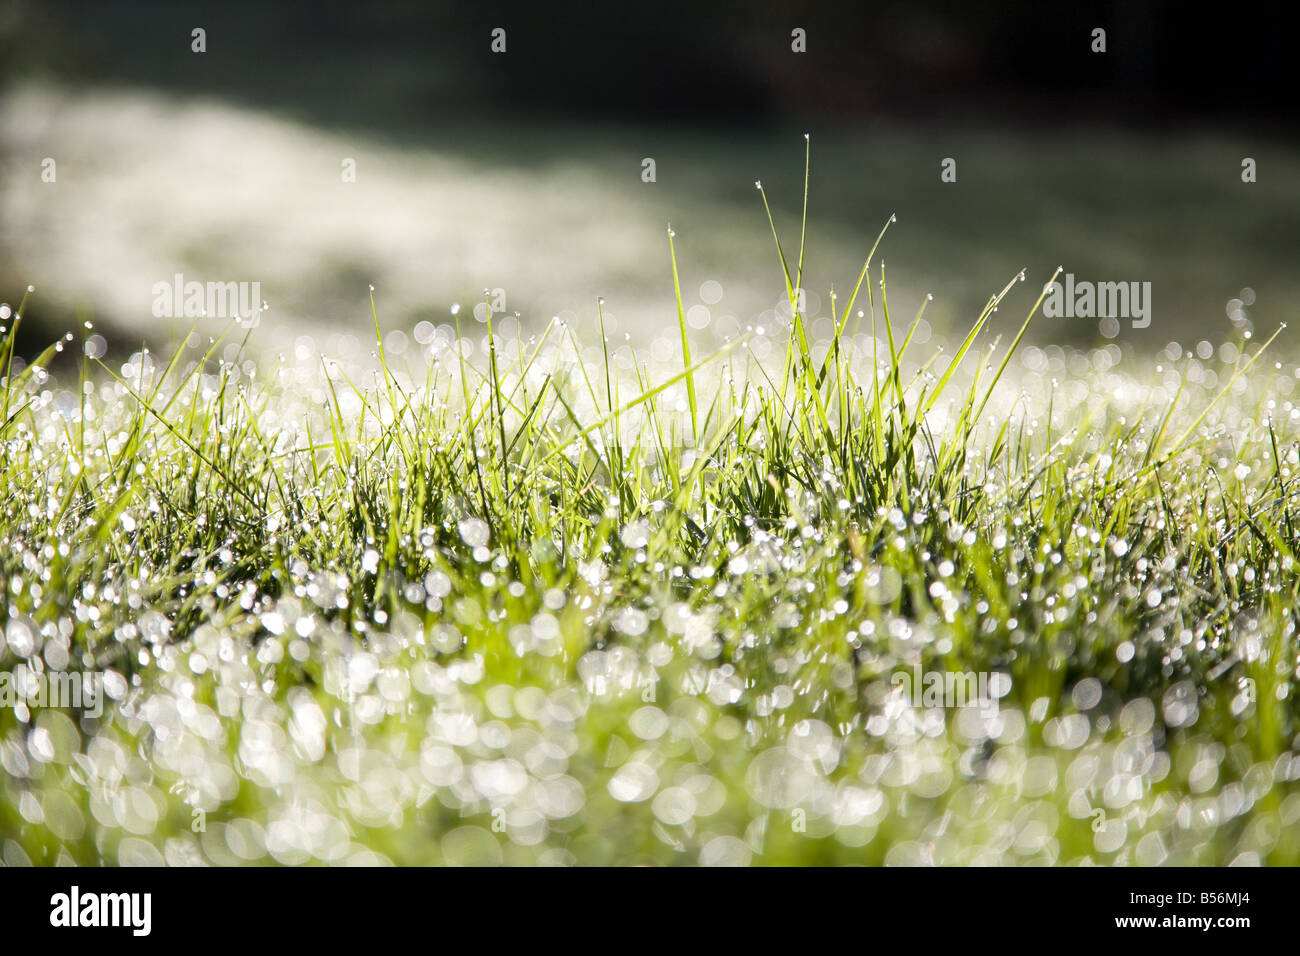 Morning dew on grass Stock Photo